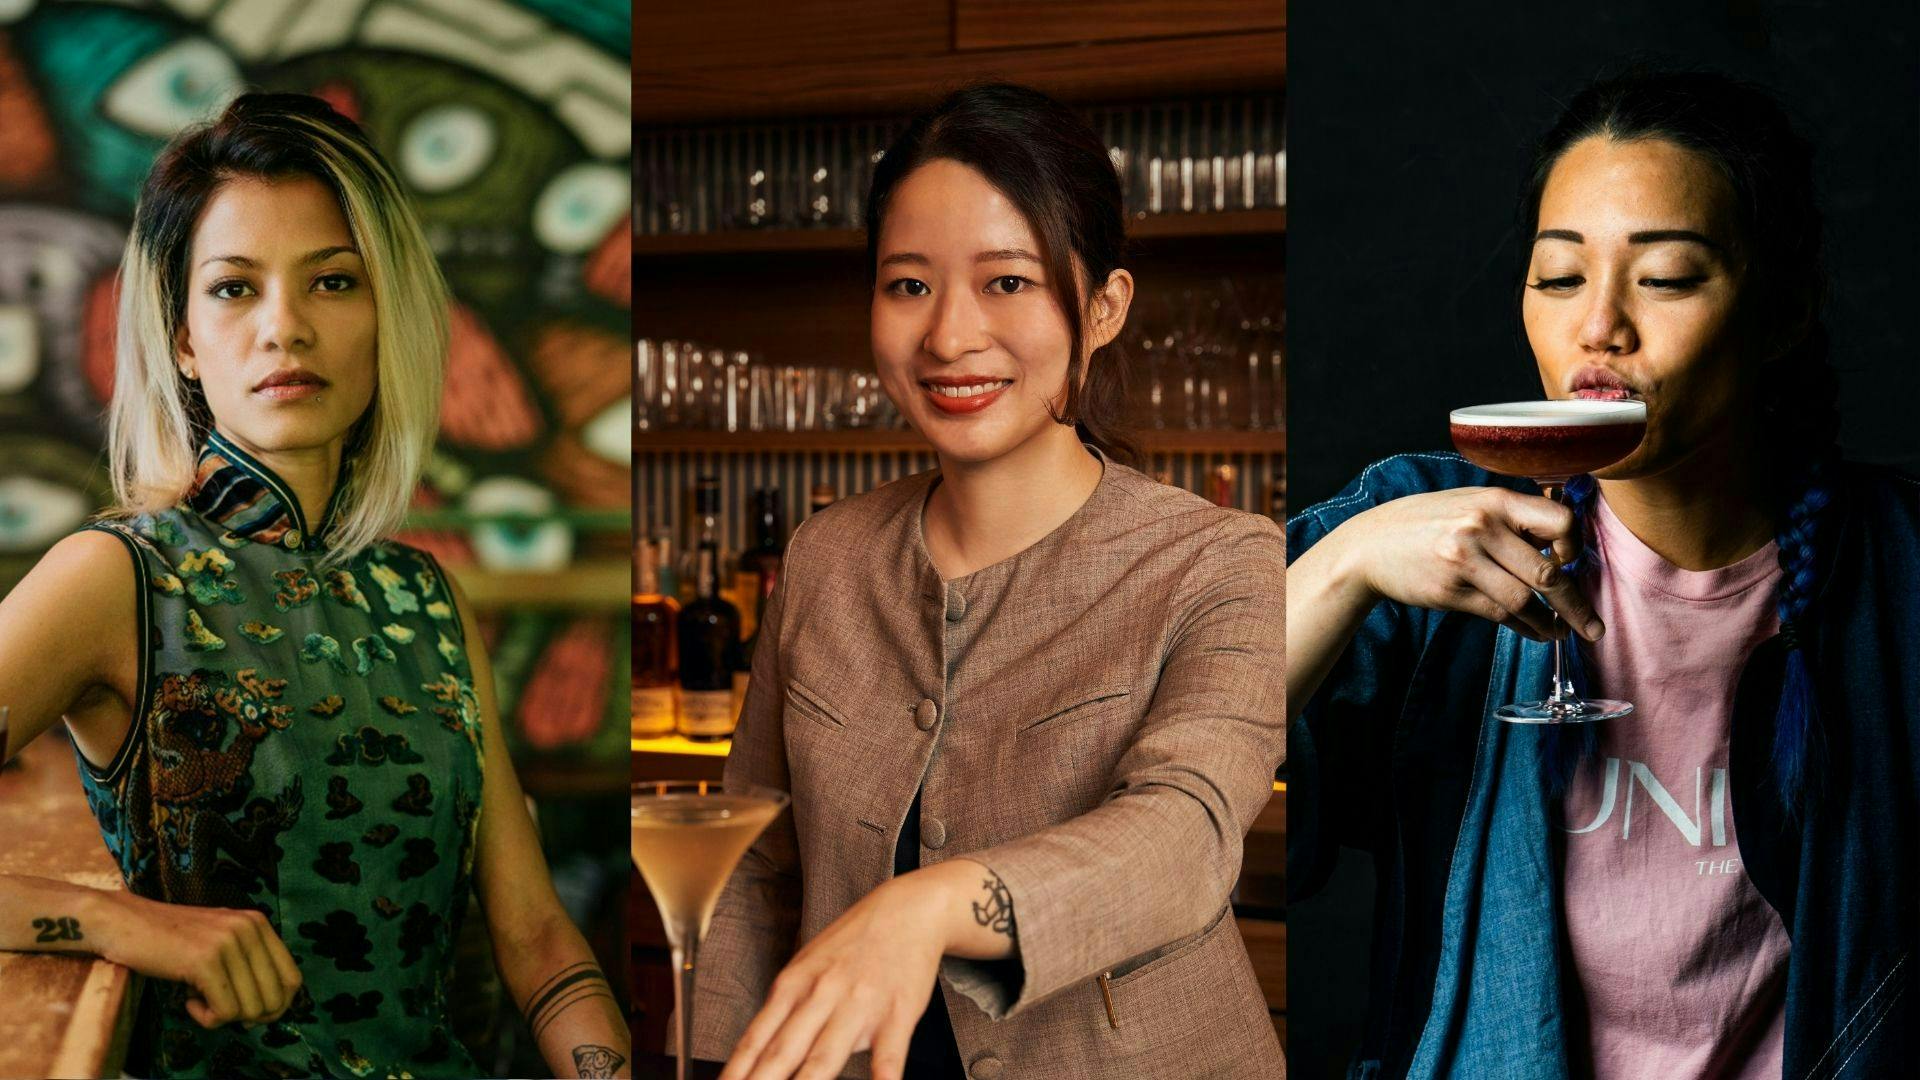 Desiree Jane of Sago House (Photographed by Joel Lim), Leow Yinying of Live Twice, and Hazel Long of Junior The Pocket Bar